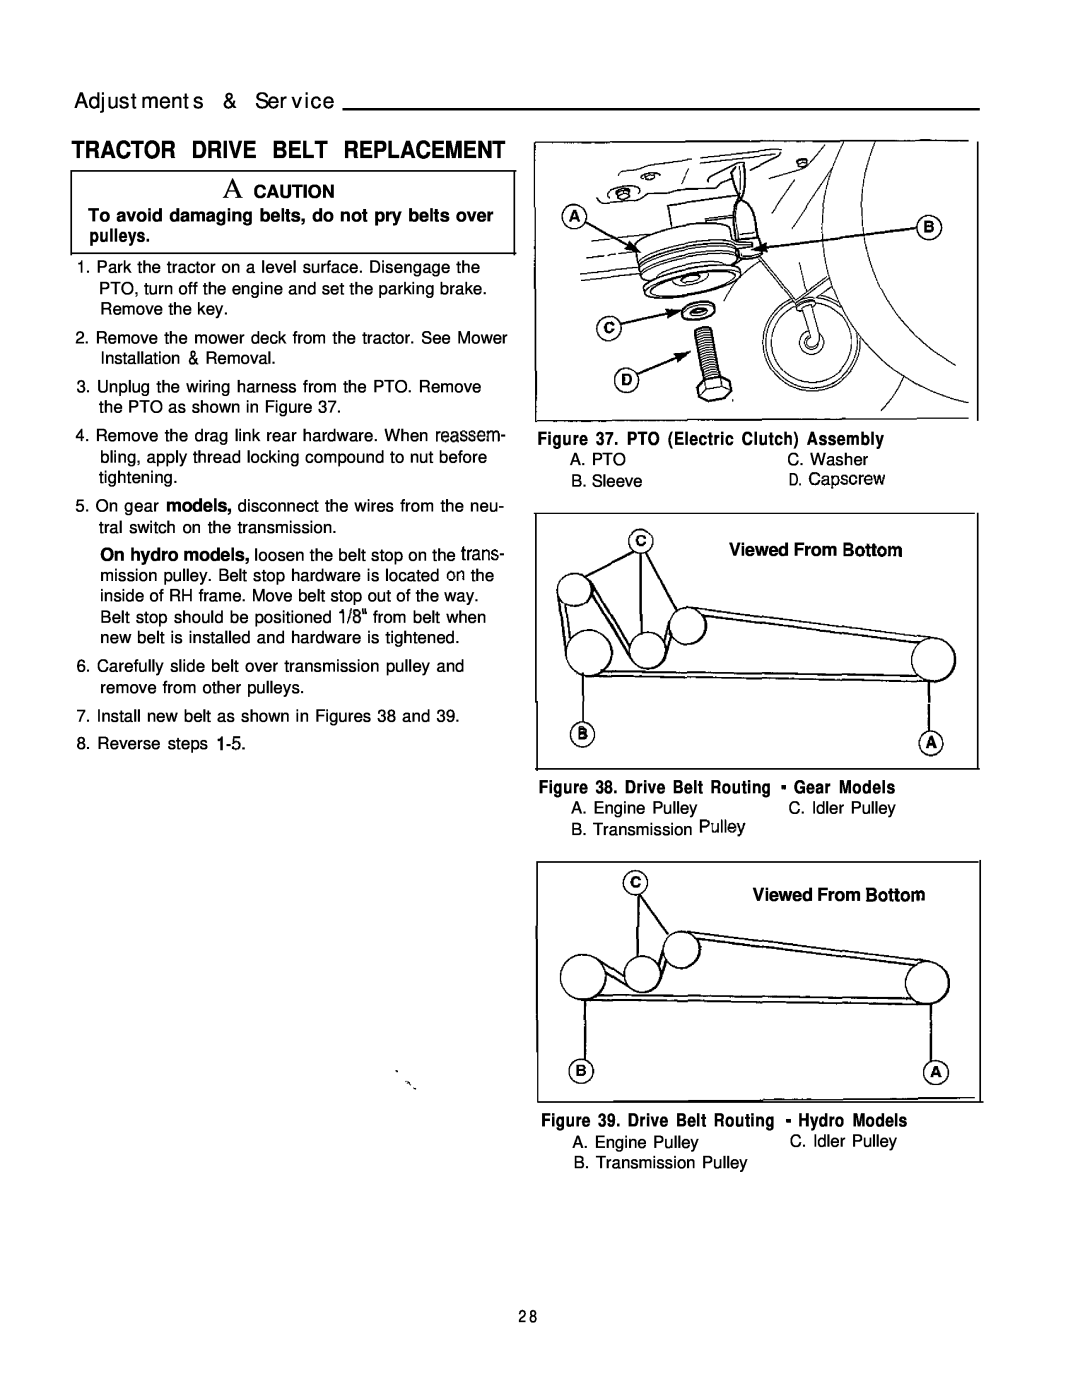 Simplicity 1693266, 1693264 manual Tractor Drive Belt Replacement, Adjustments & Service 